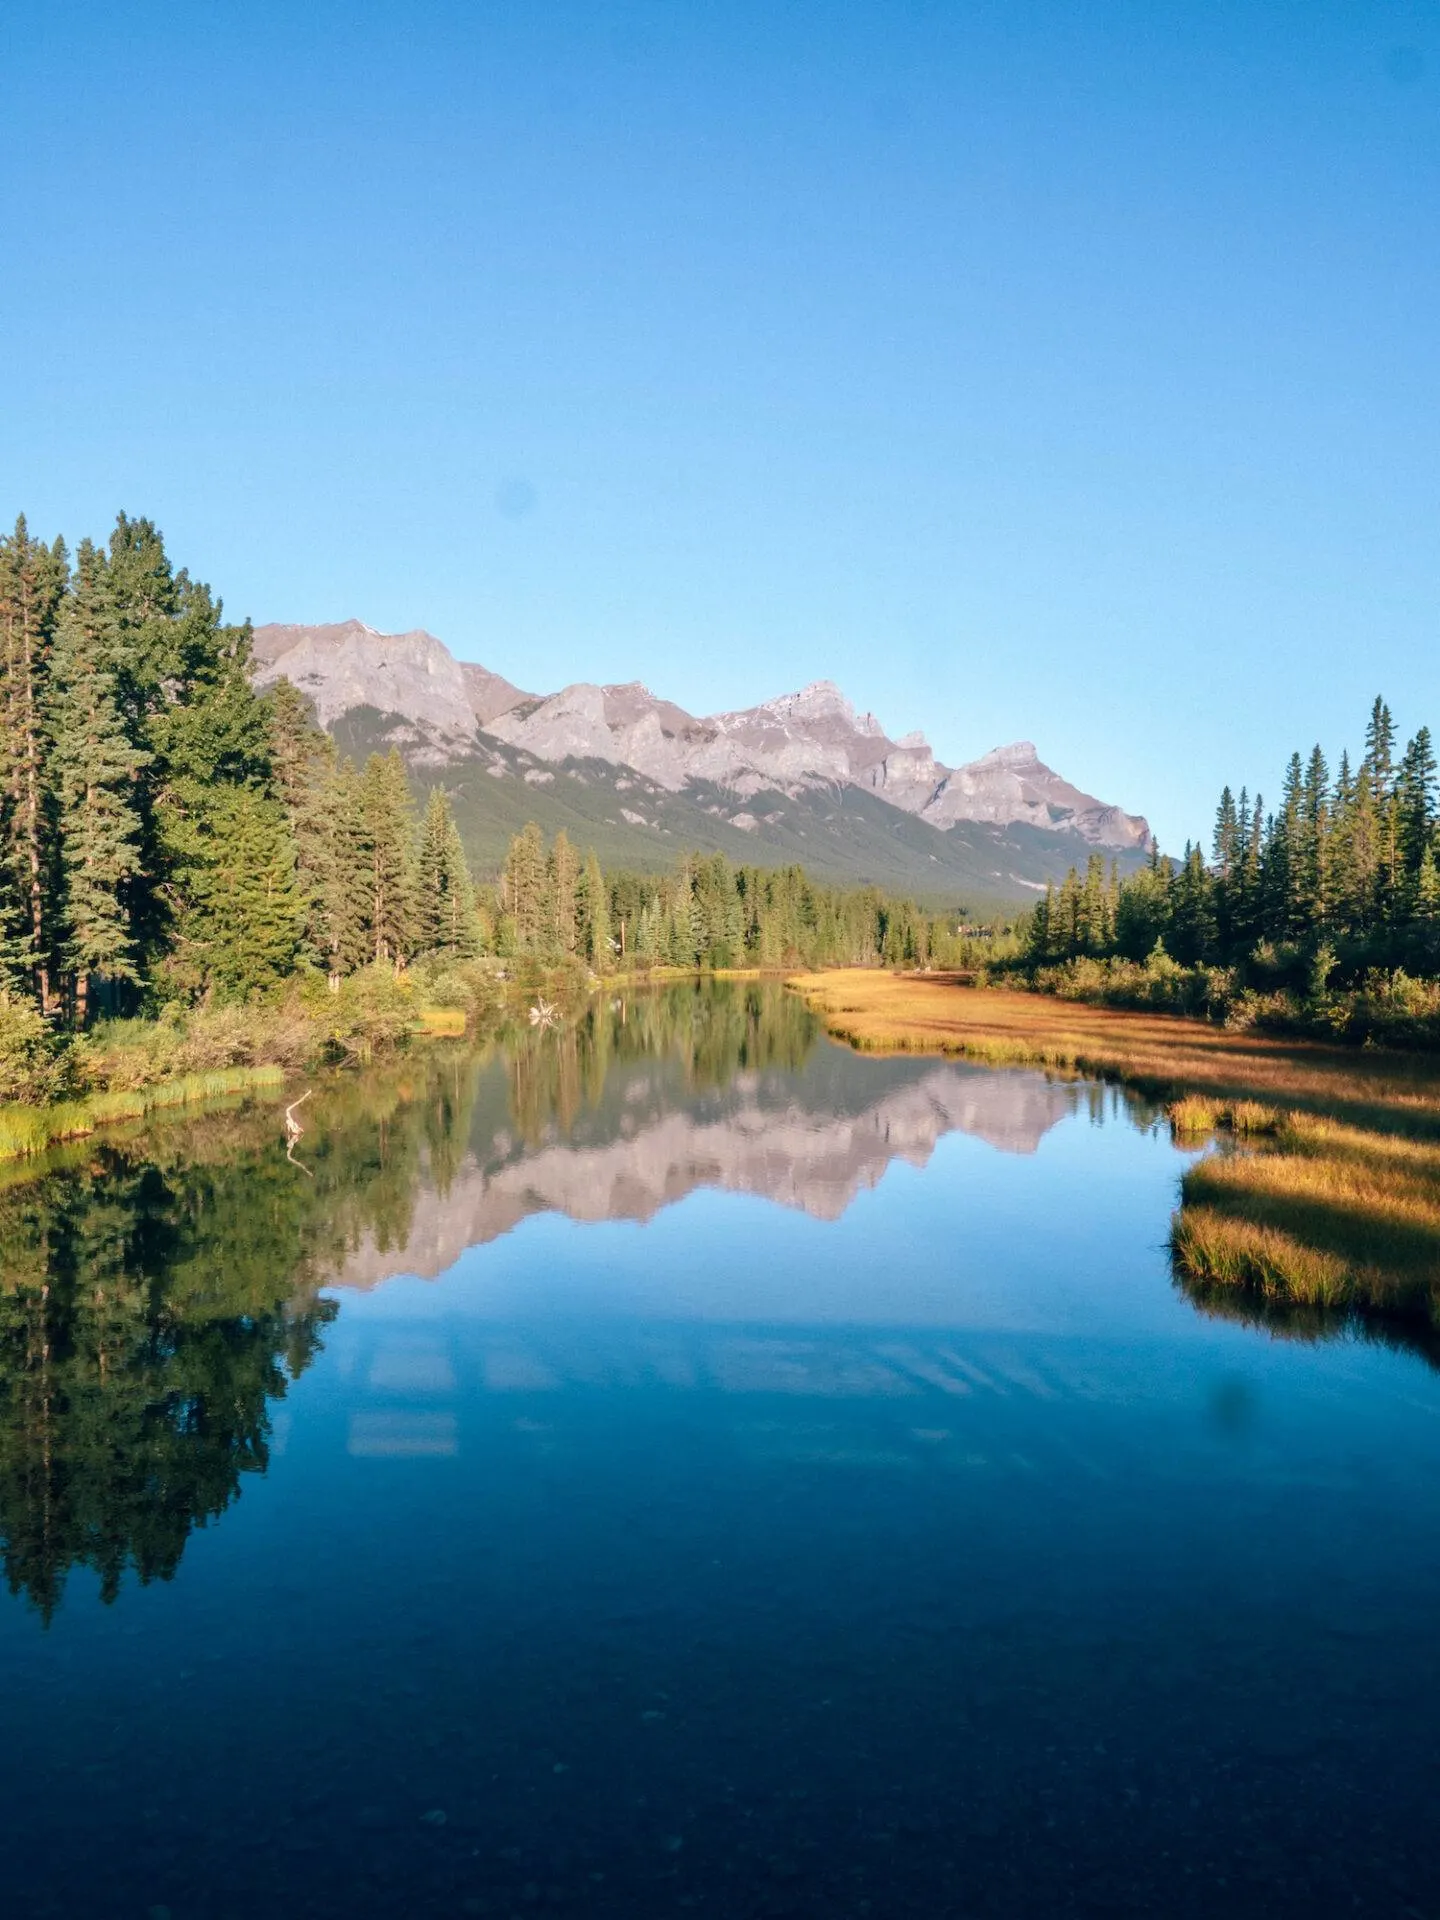 Visiting Banff National Park soon? Don't miss this guide of the 50 best things to in Banff for every kind of traveler! I recently spent 8 days exploring the area and took notes along the way so I could write you the most comprehensive guide possible. This guide includes all the top attractions, hikes, restaurants, and sights you definitely won't want to miss when you visit Banff National Park. I also include any tips you might need when visiting the area! Pictured here: Stroll along Policeman's Creek Boardwalk in Canmore